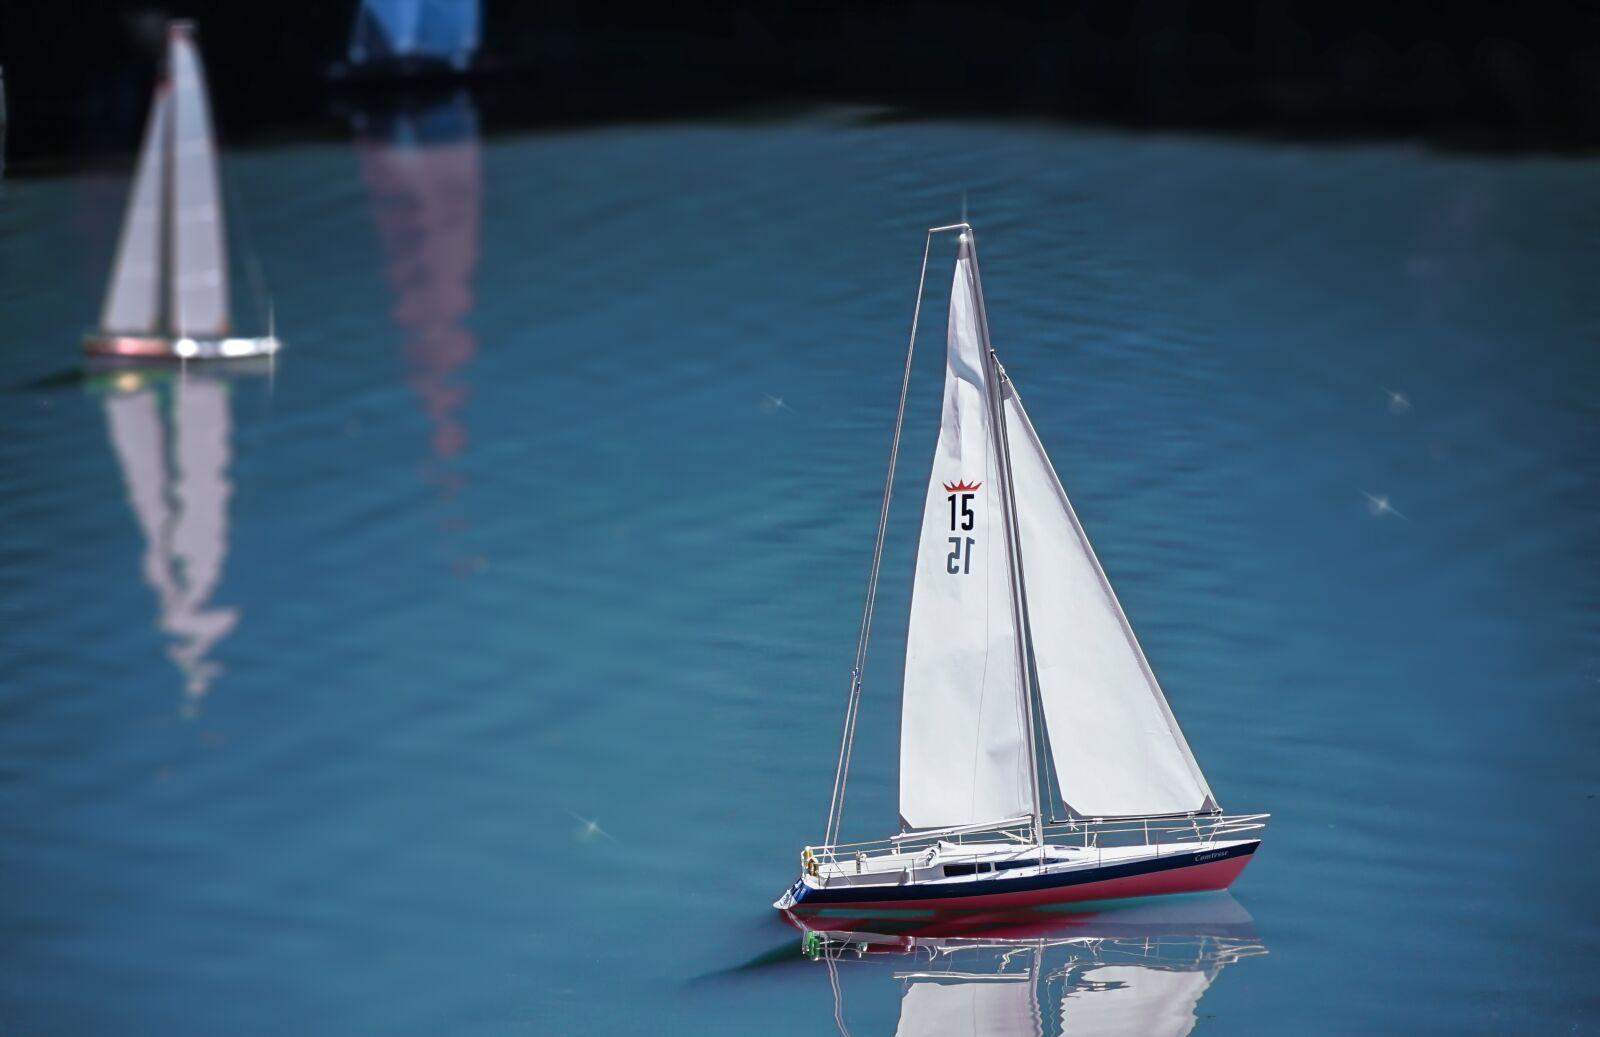 Sony a7 II + Sony E PZ 18-105mm F4 G OSS sample photo. Sailing boat, water, ship photography